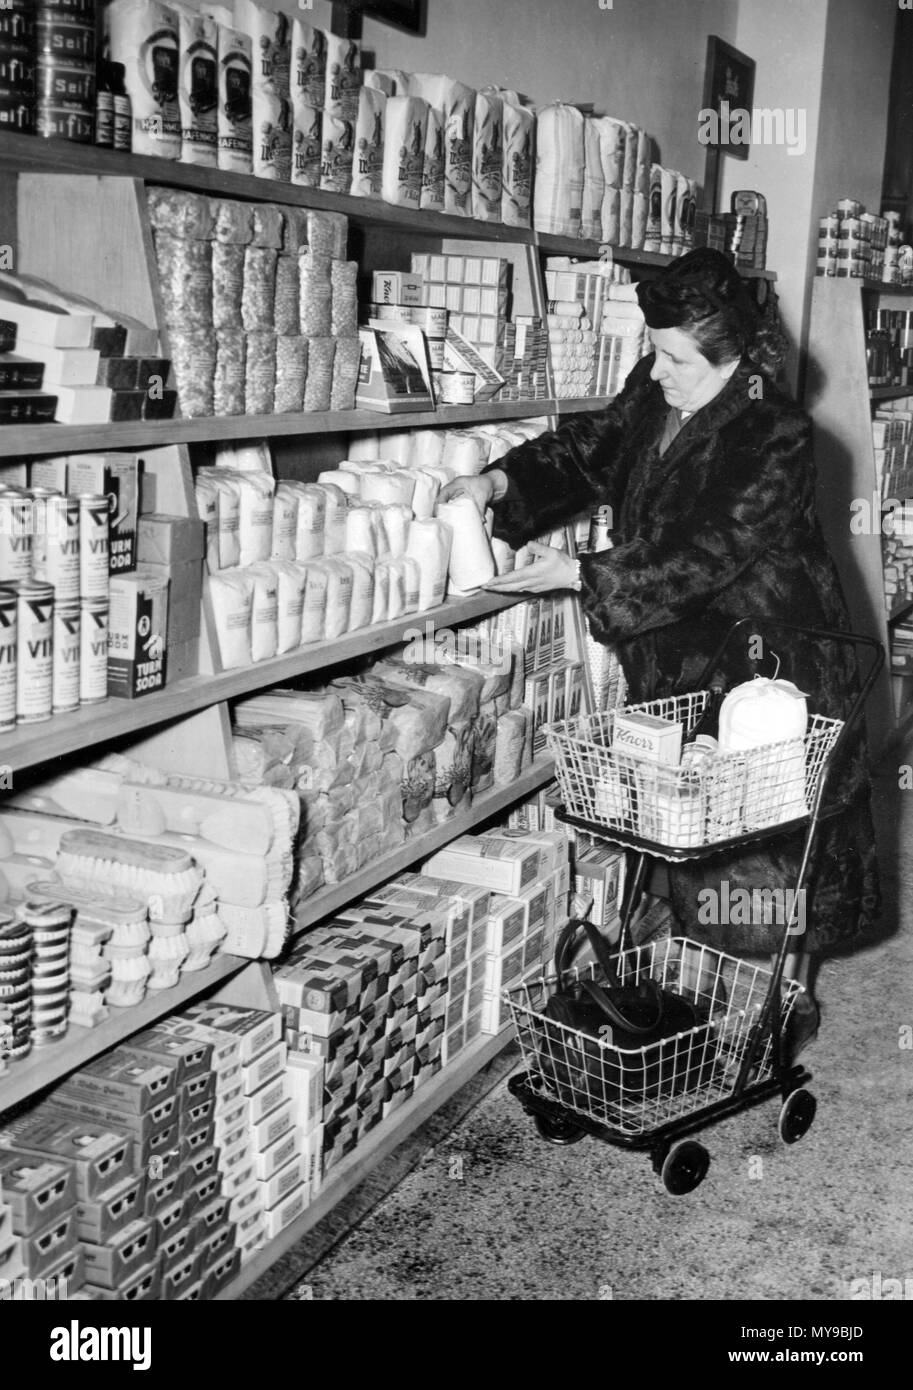 A customer takes the desired product off the shelf. The third self-service  store in western Germany opened in Frankfurt am Main in December 1949. The  shop was furnished by the company Meyer